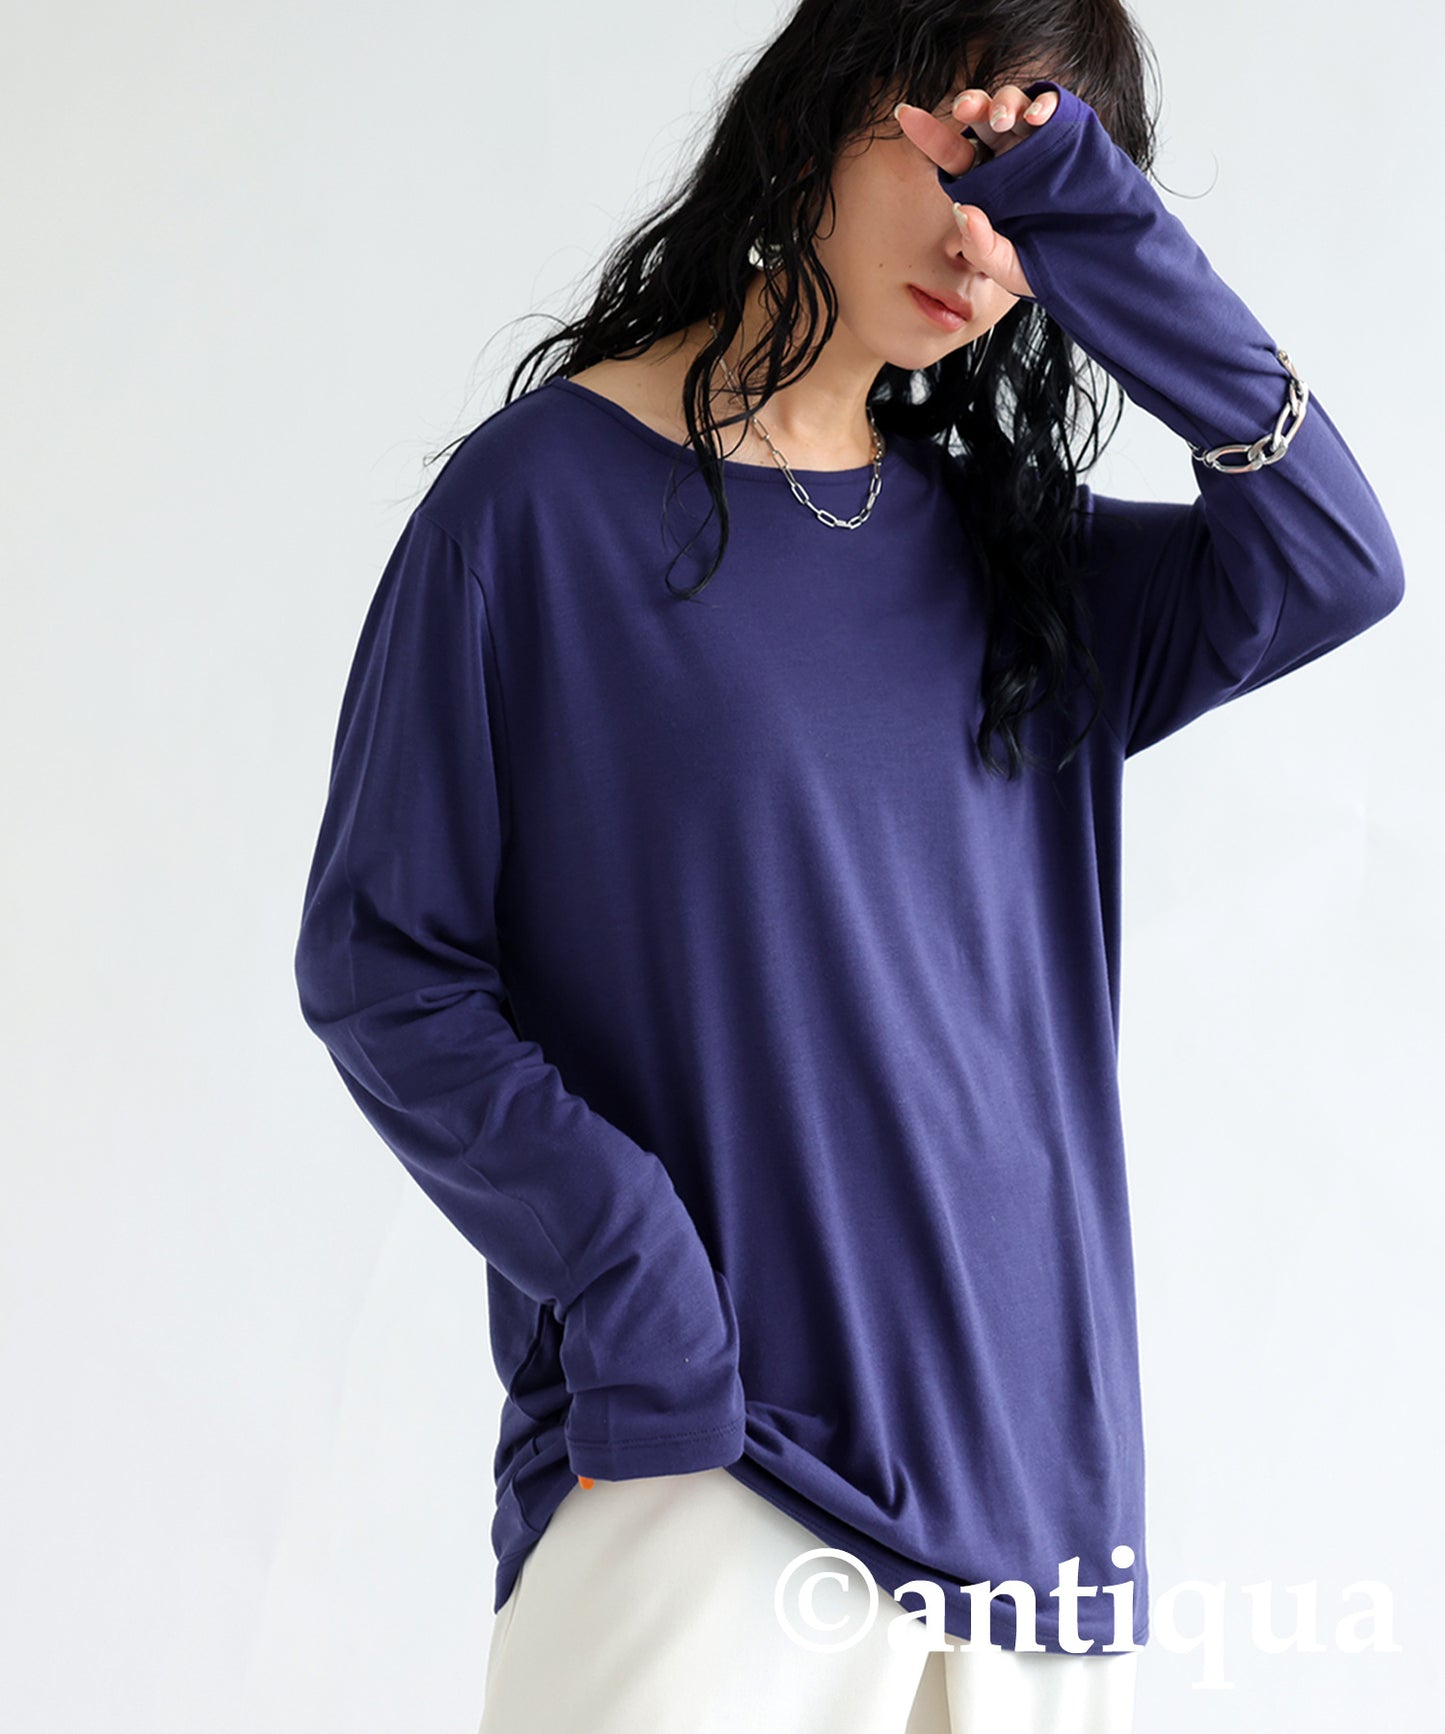 Cool touch UV Cut Ladies tops Tops in rib with thumb hole